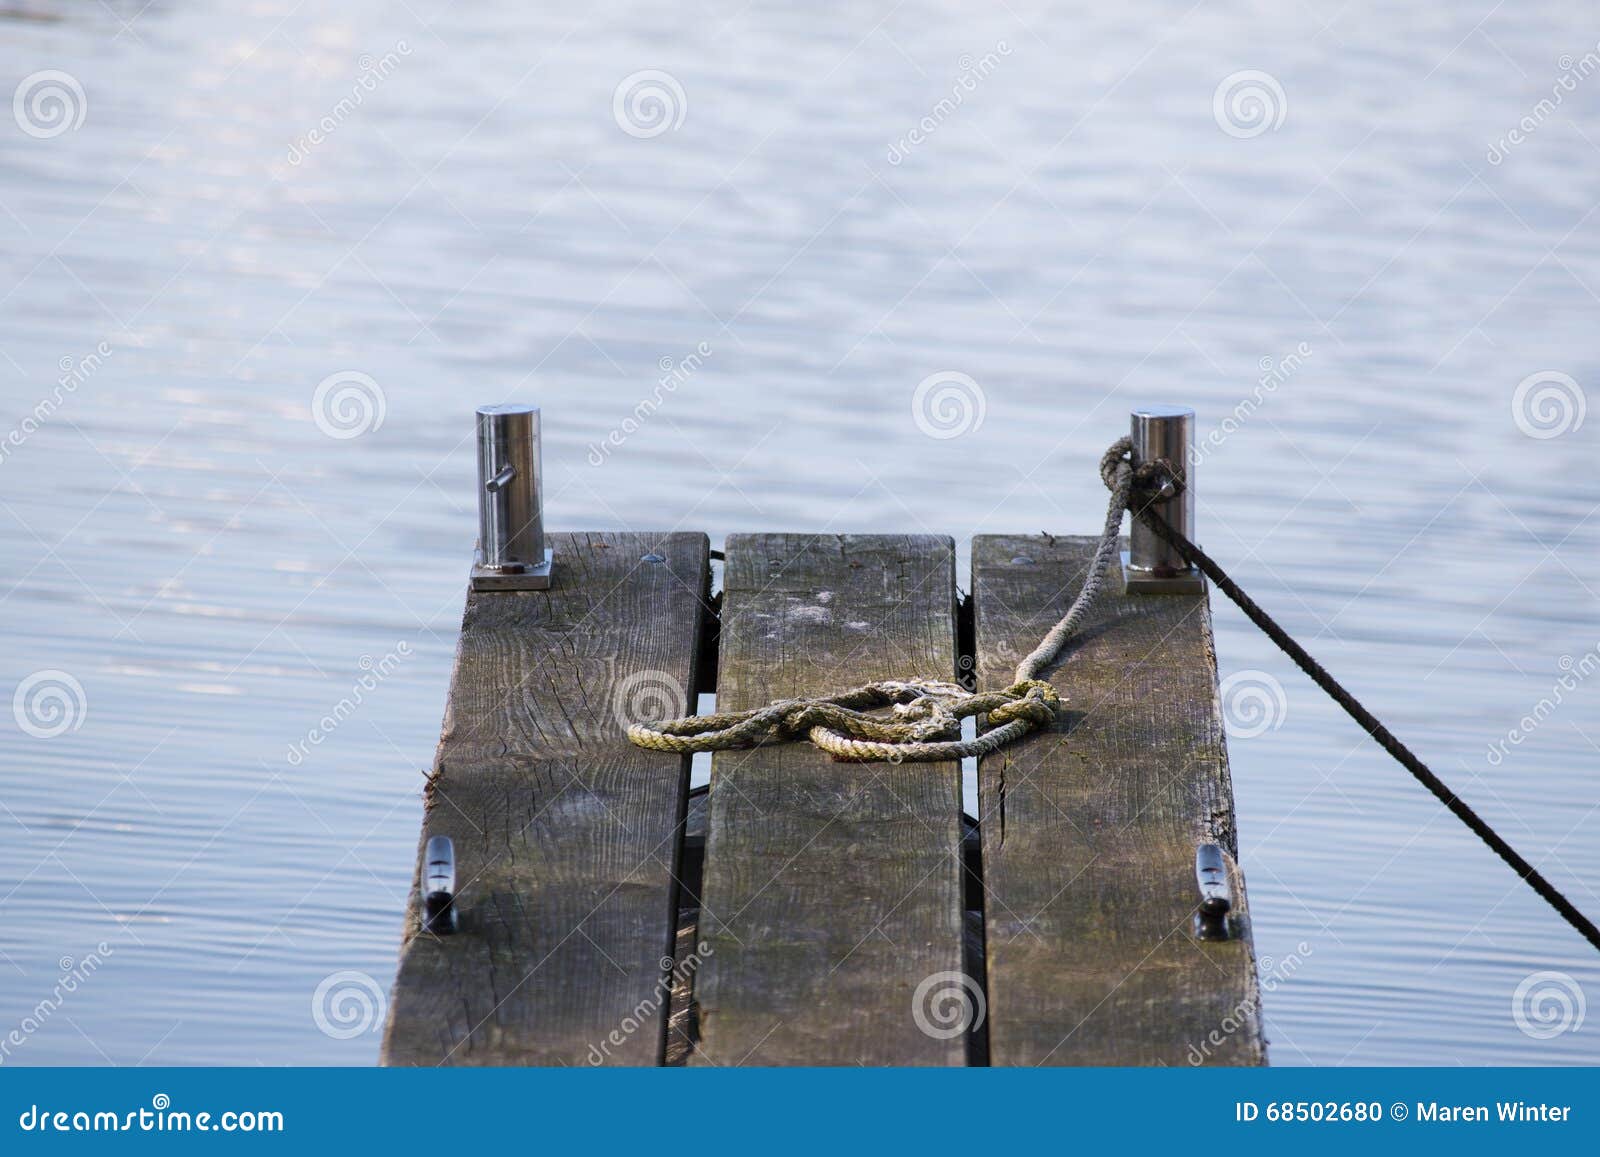 Wooden Jetty For Boats And An Old Rope In The Blue Water 